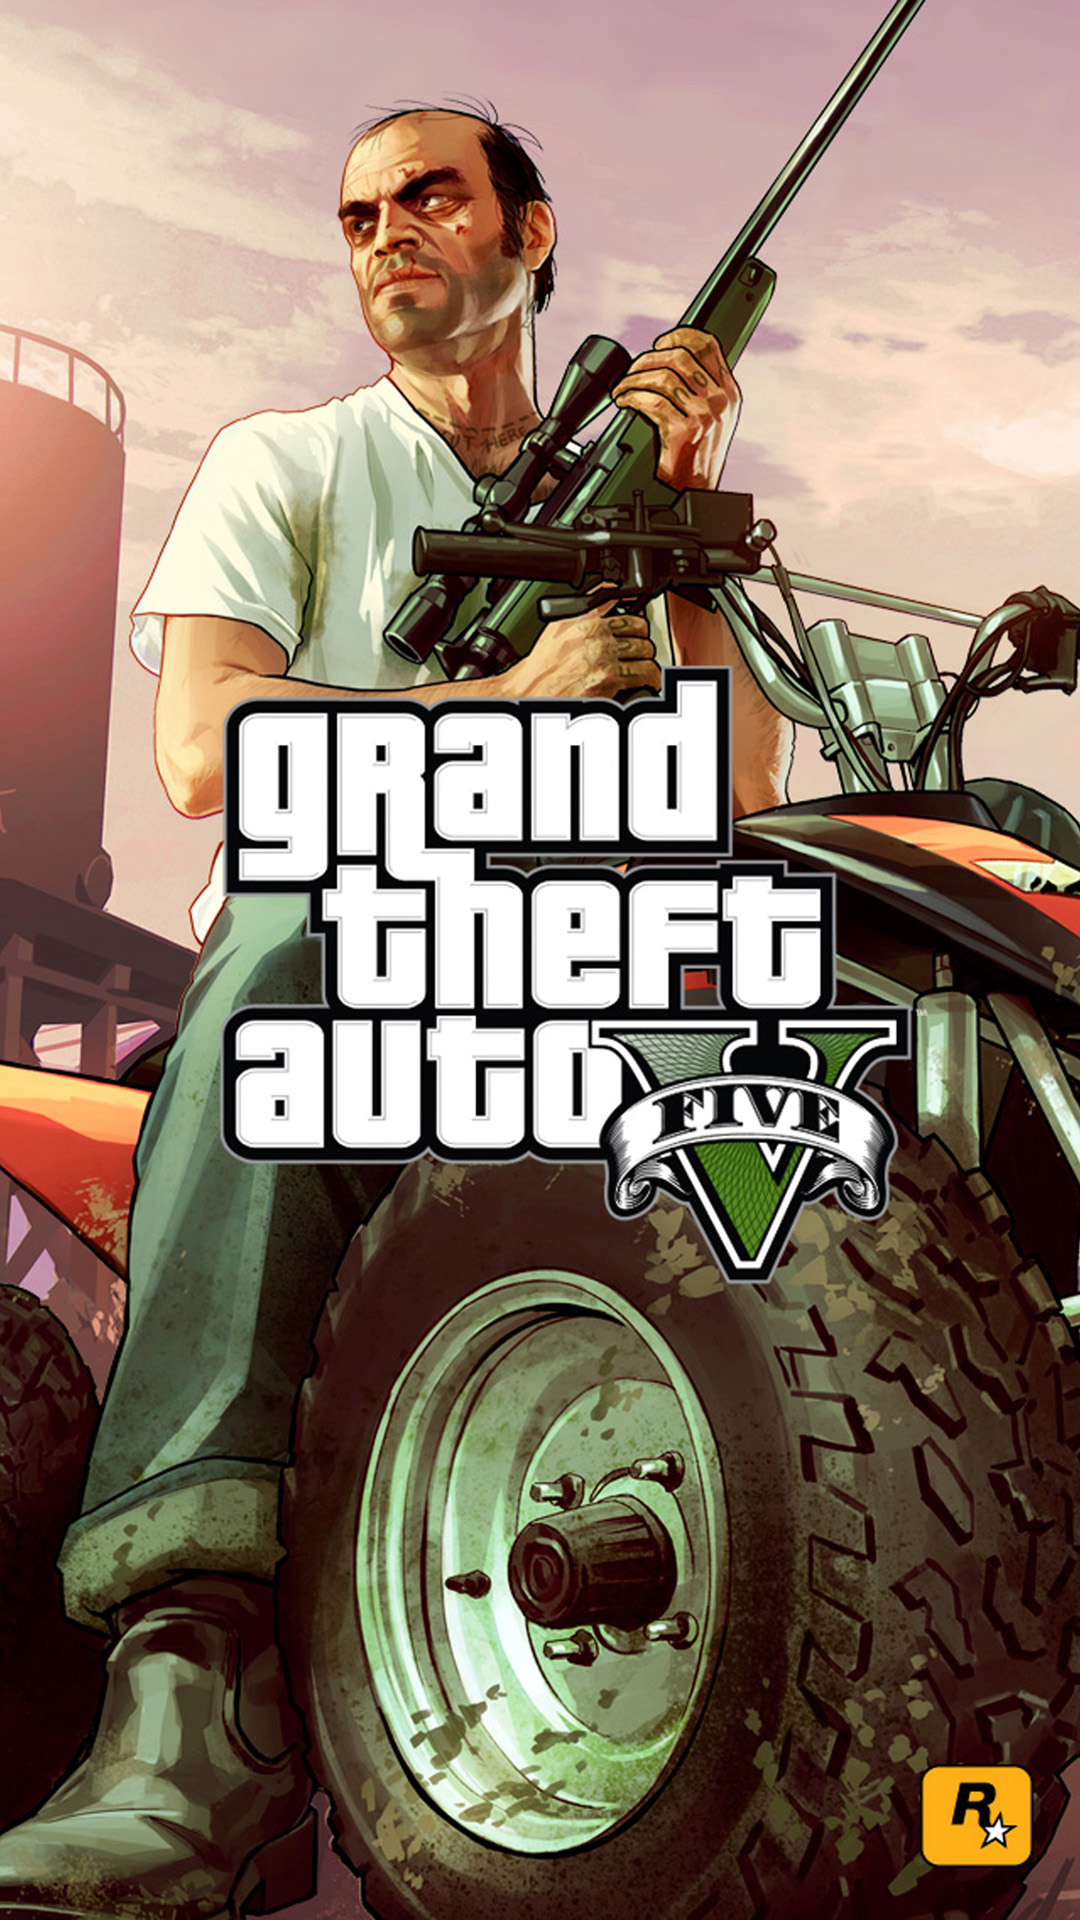 Gta HD Wallpaper For Mobile ImgHD Browse And